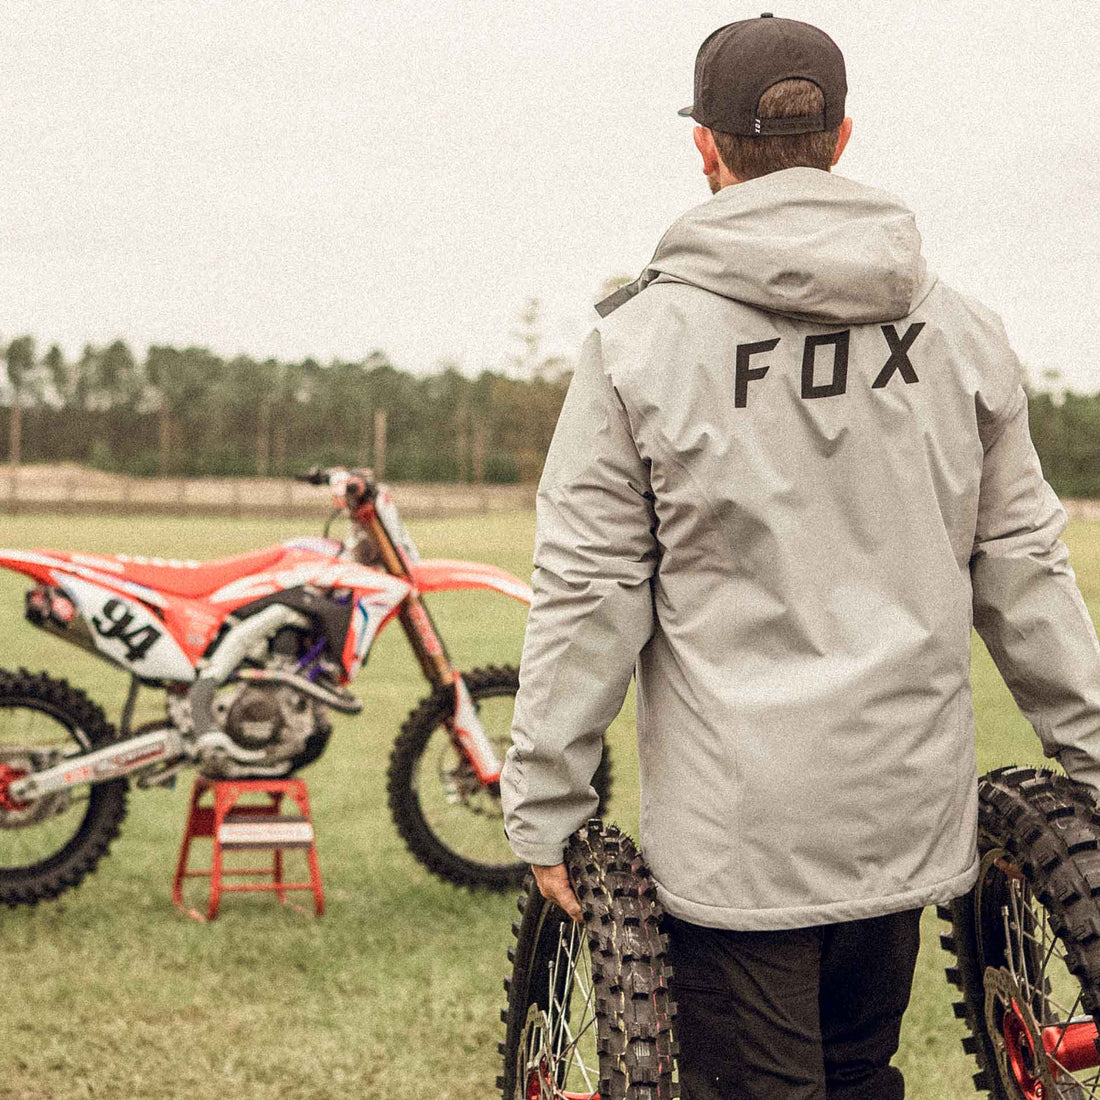 Guy at a motocross track holding on to a set of dirt bike wheels, wearing a Fox Racing Jacket. 